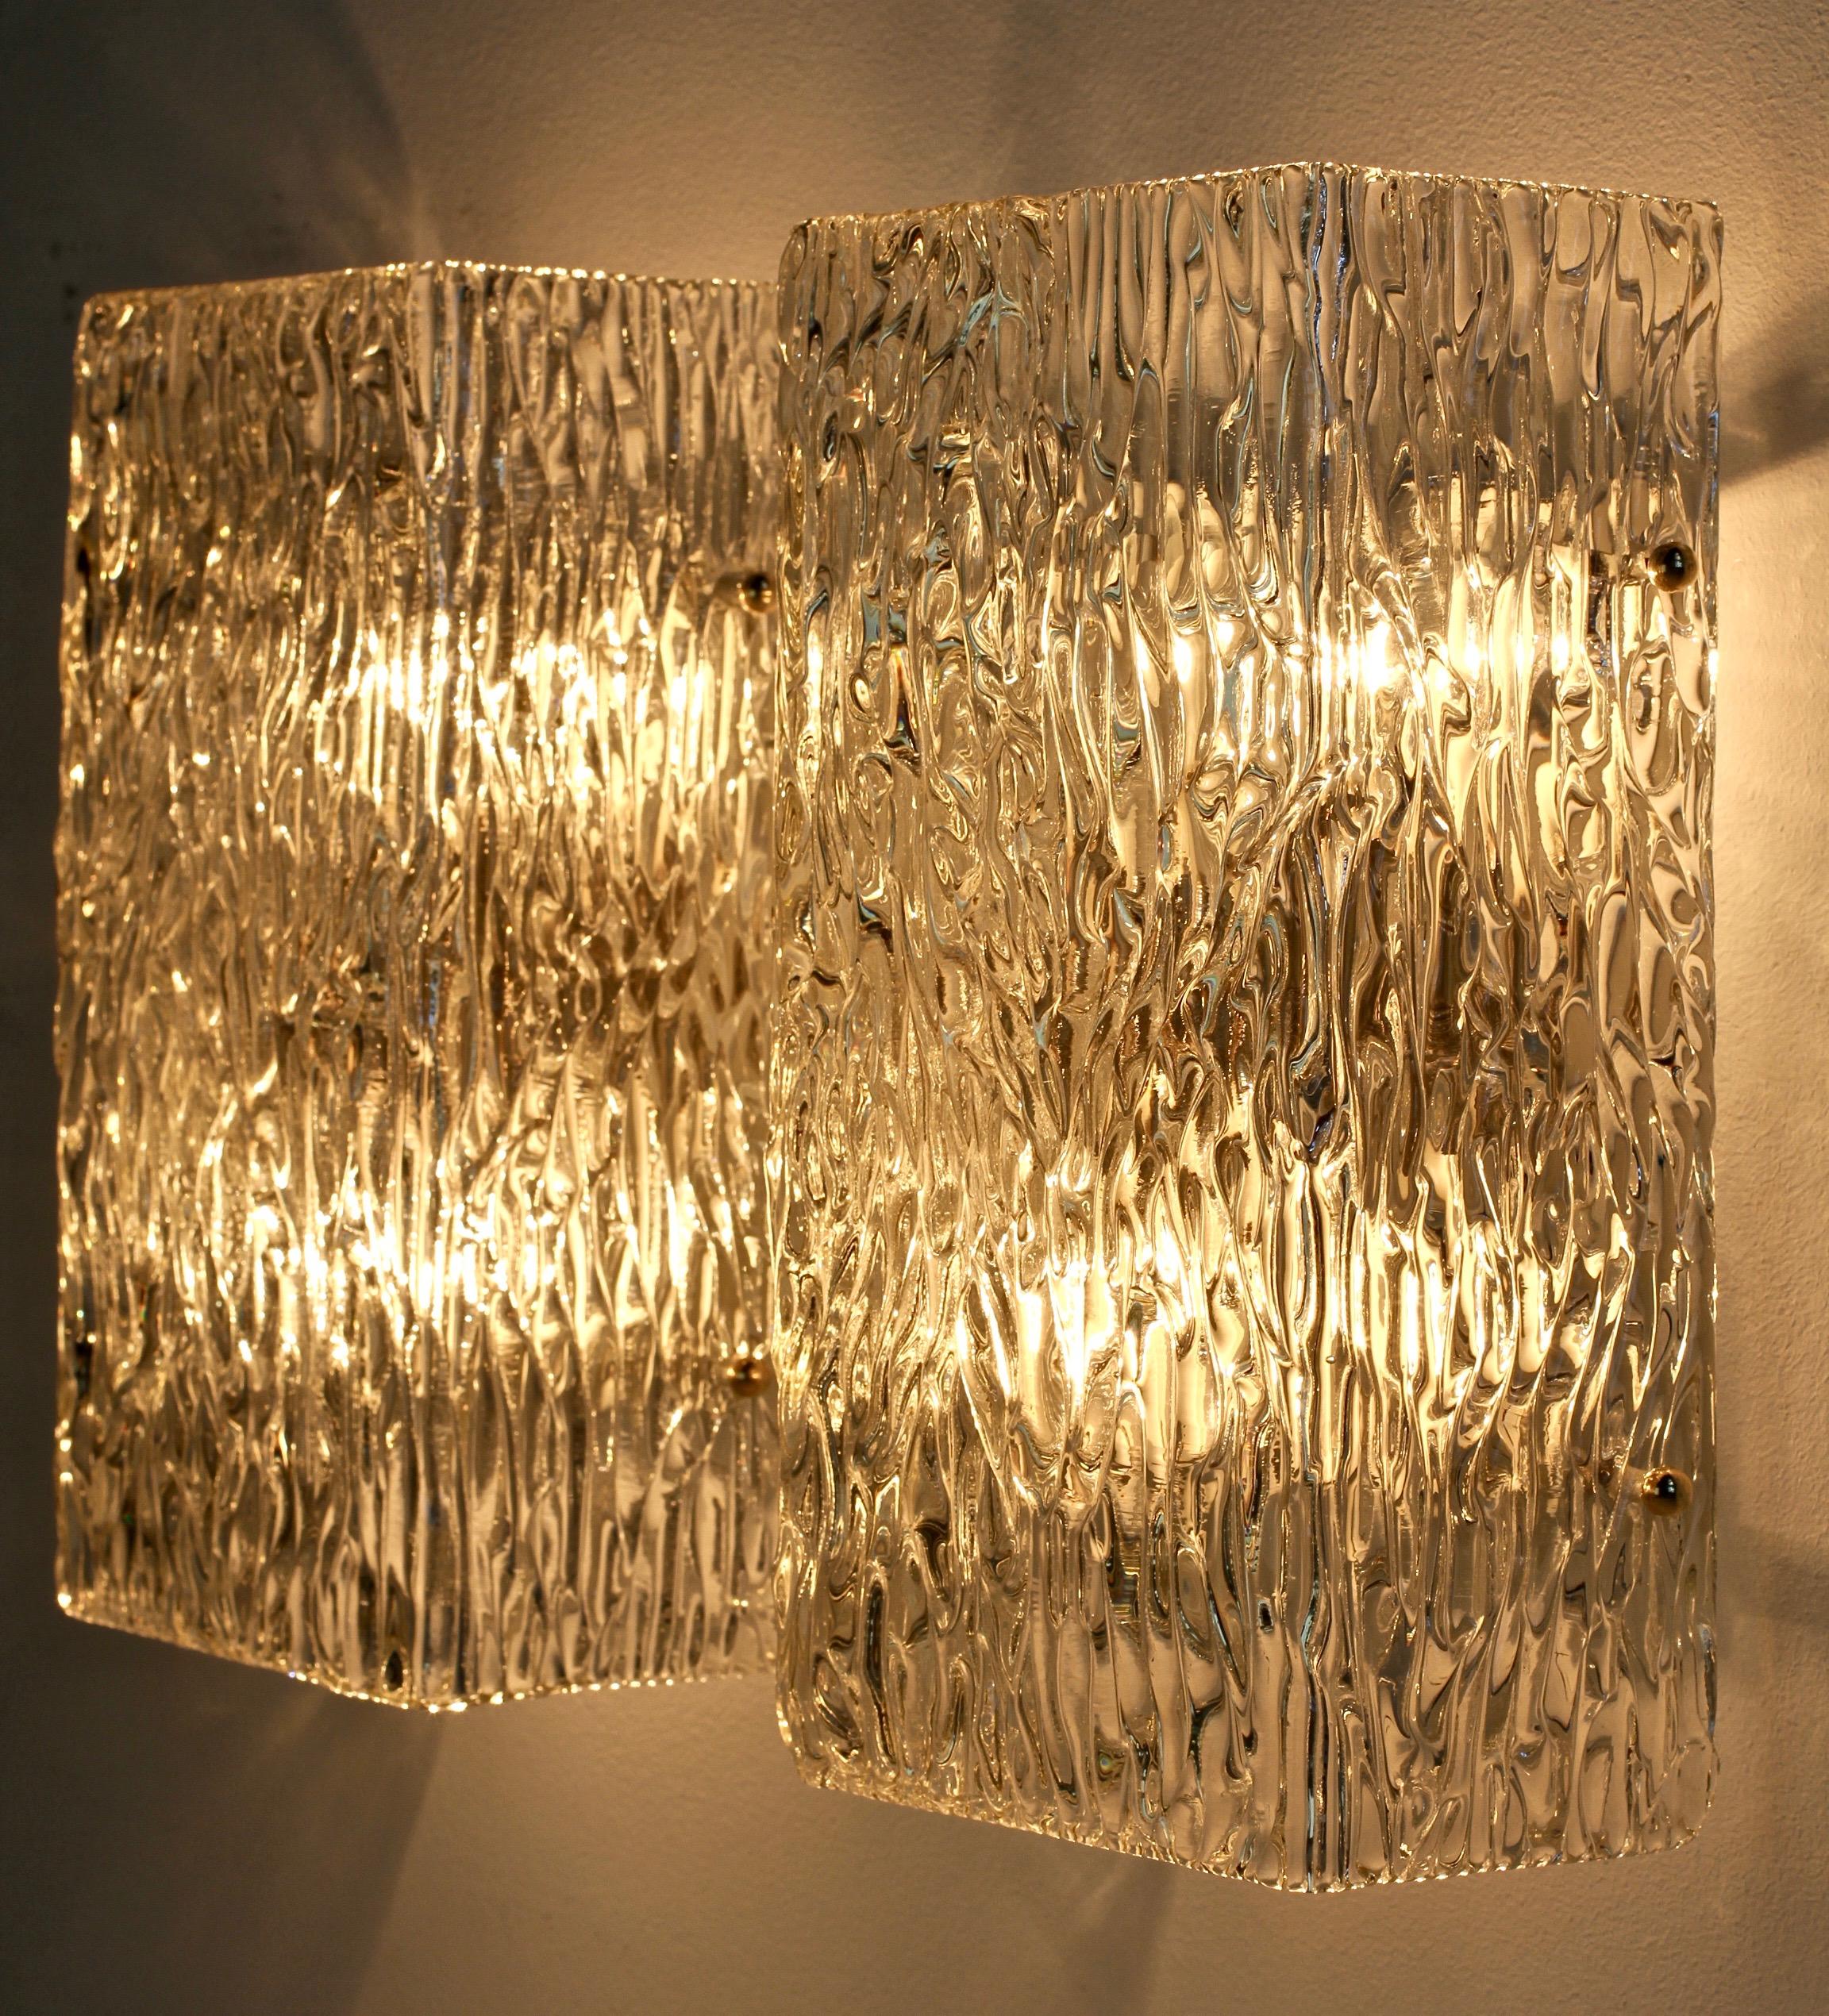 1 of 4 Large Austrian Textured Glass Wall Lights or Sconces by JT Kalmar c. 1955 For Sale 5